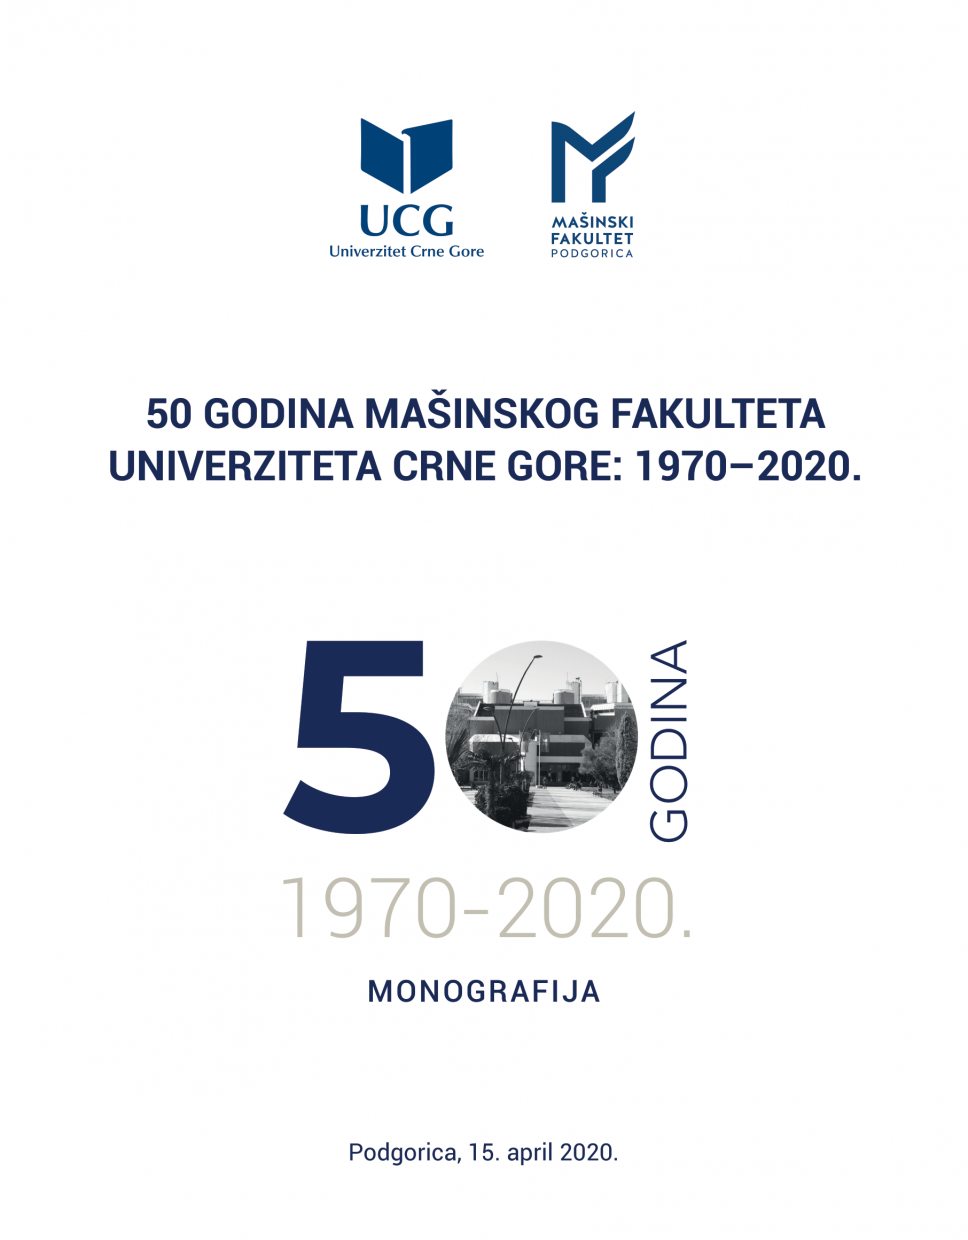 50 years of the Faculty of Mechanical Engineering, University of Montenegro: 1970-2020.